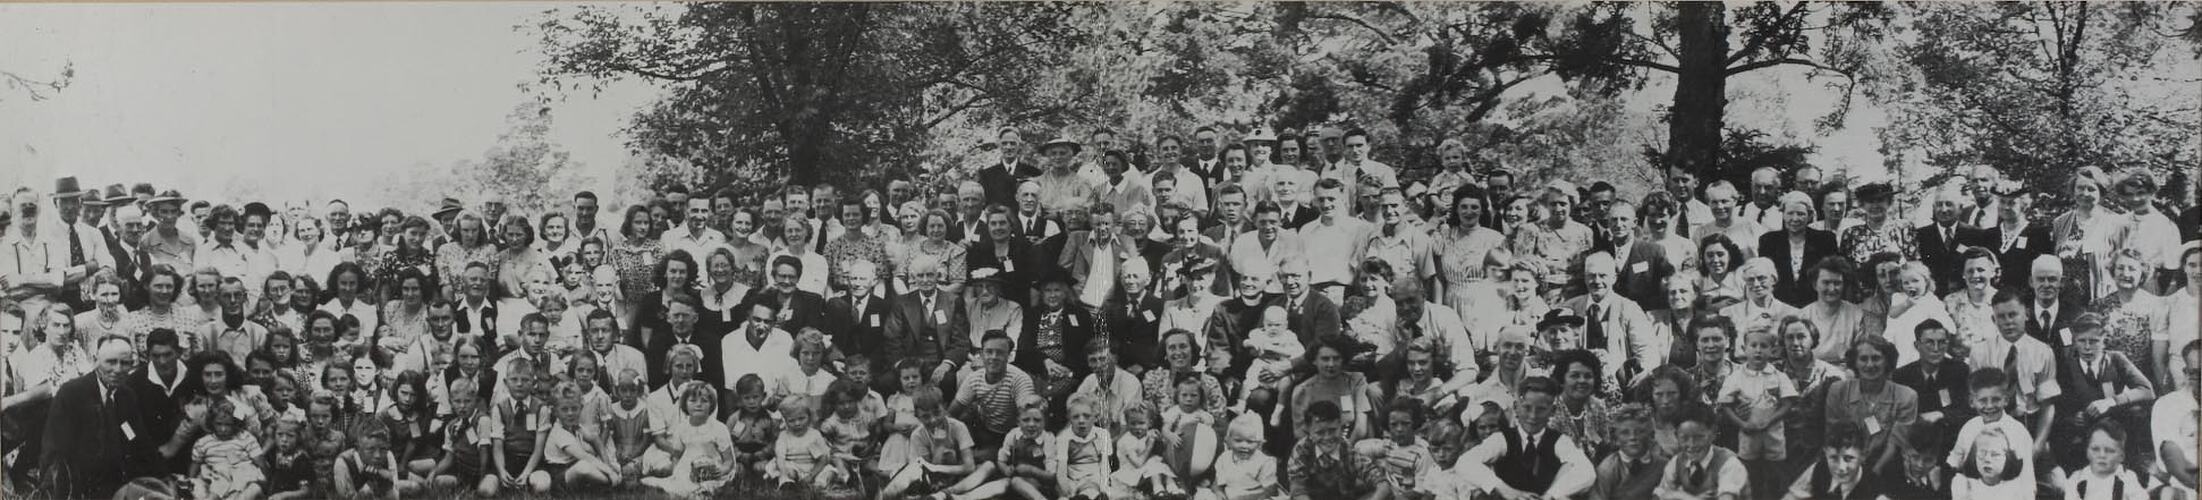 Digital Photograph - Family Gathering of over 100 people, at Annual Picnic, Heidelberg, 1949